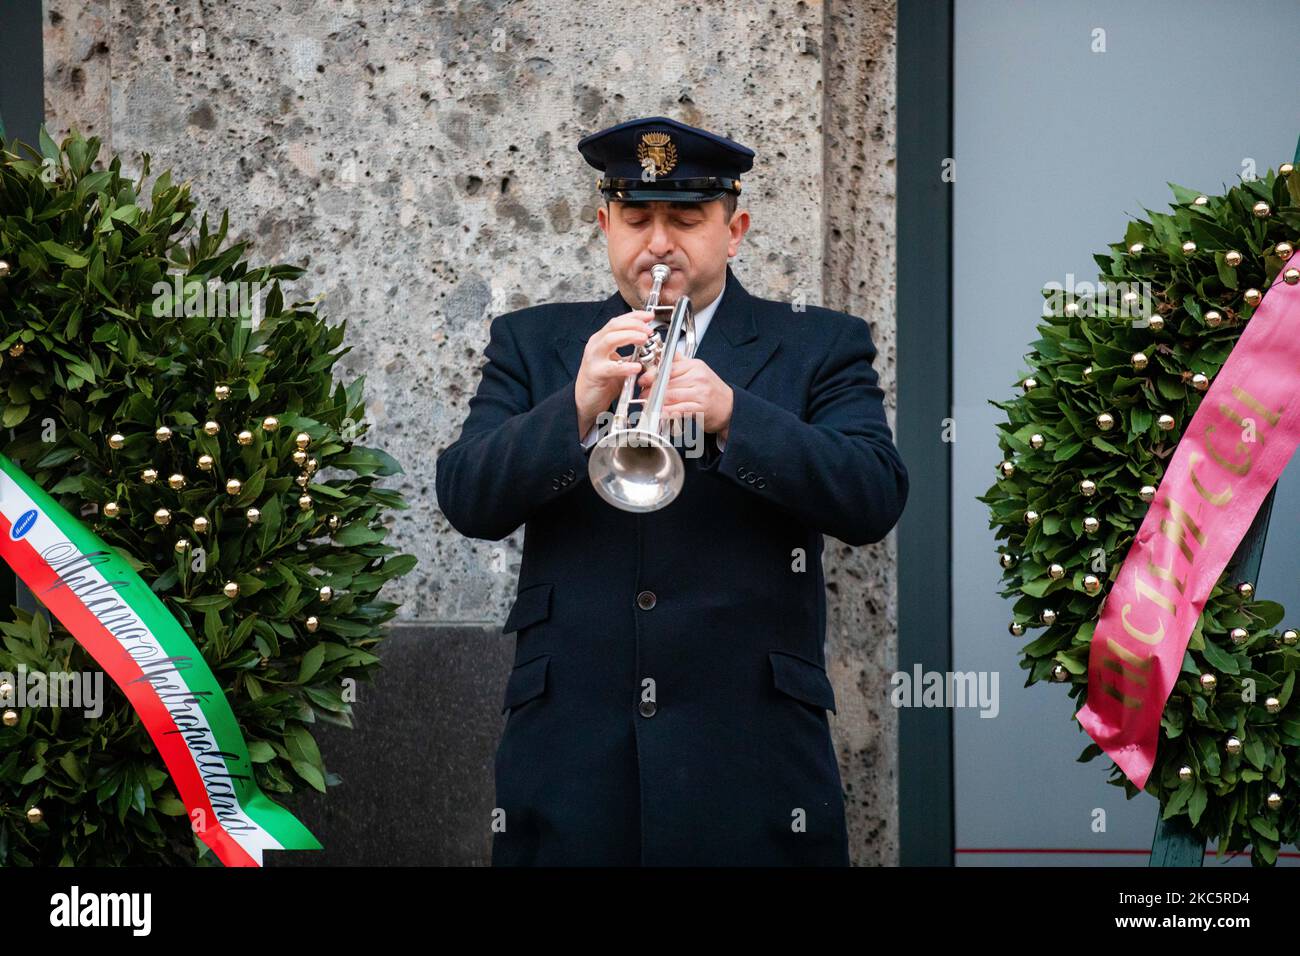 The commemoration of the victims on the 51st anniversary of the massacre in Piazza Fontana on December 12, 2020 in Milan, Italy. (Photo by Alessandro Bremec/NurPhoto) Stock Photo